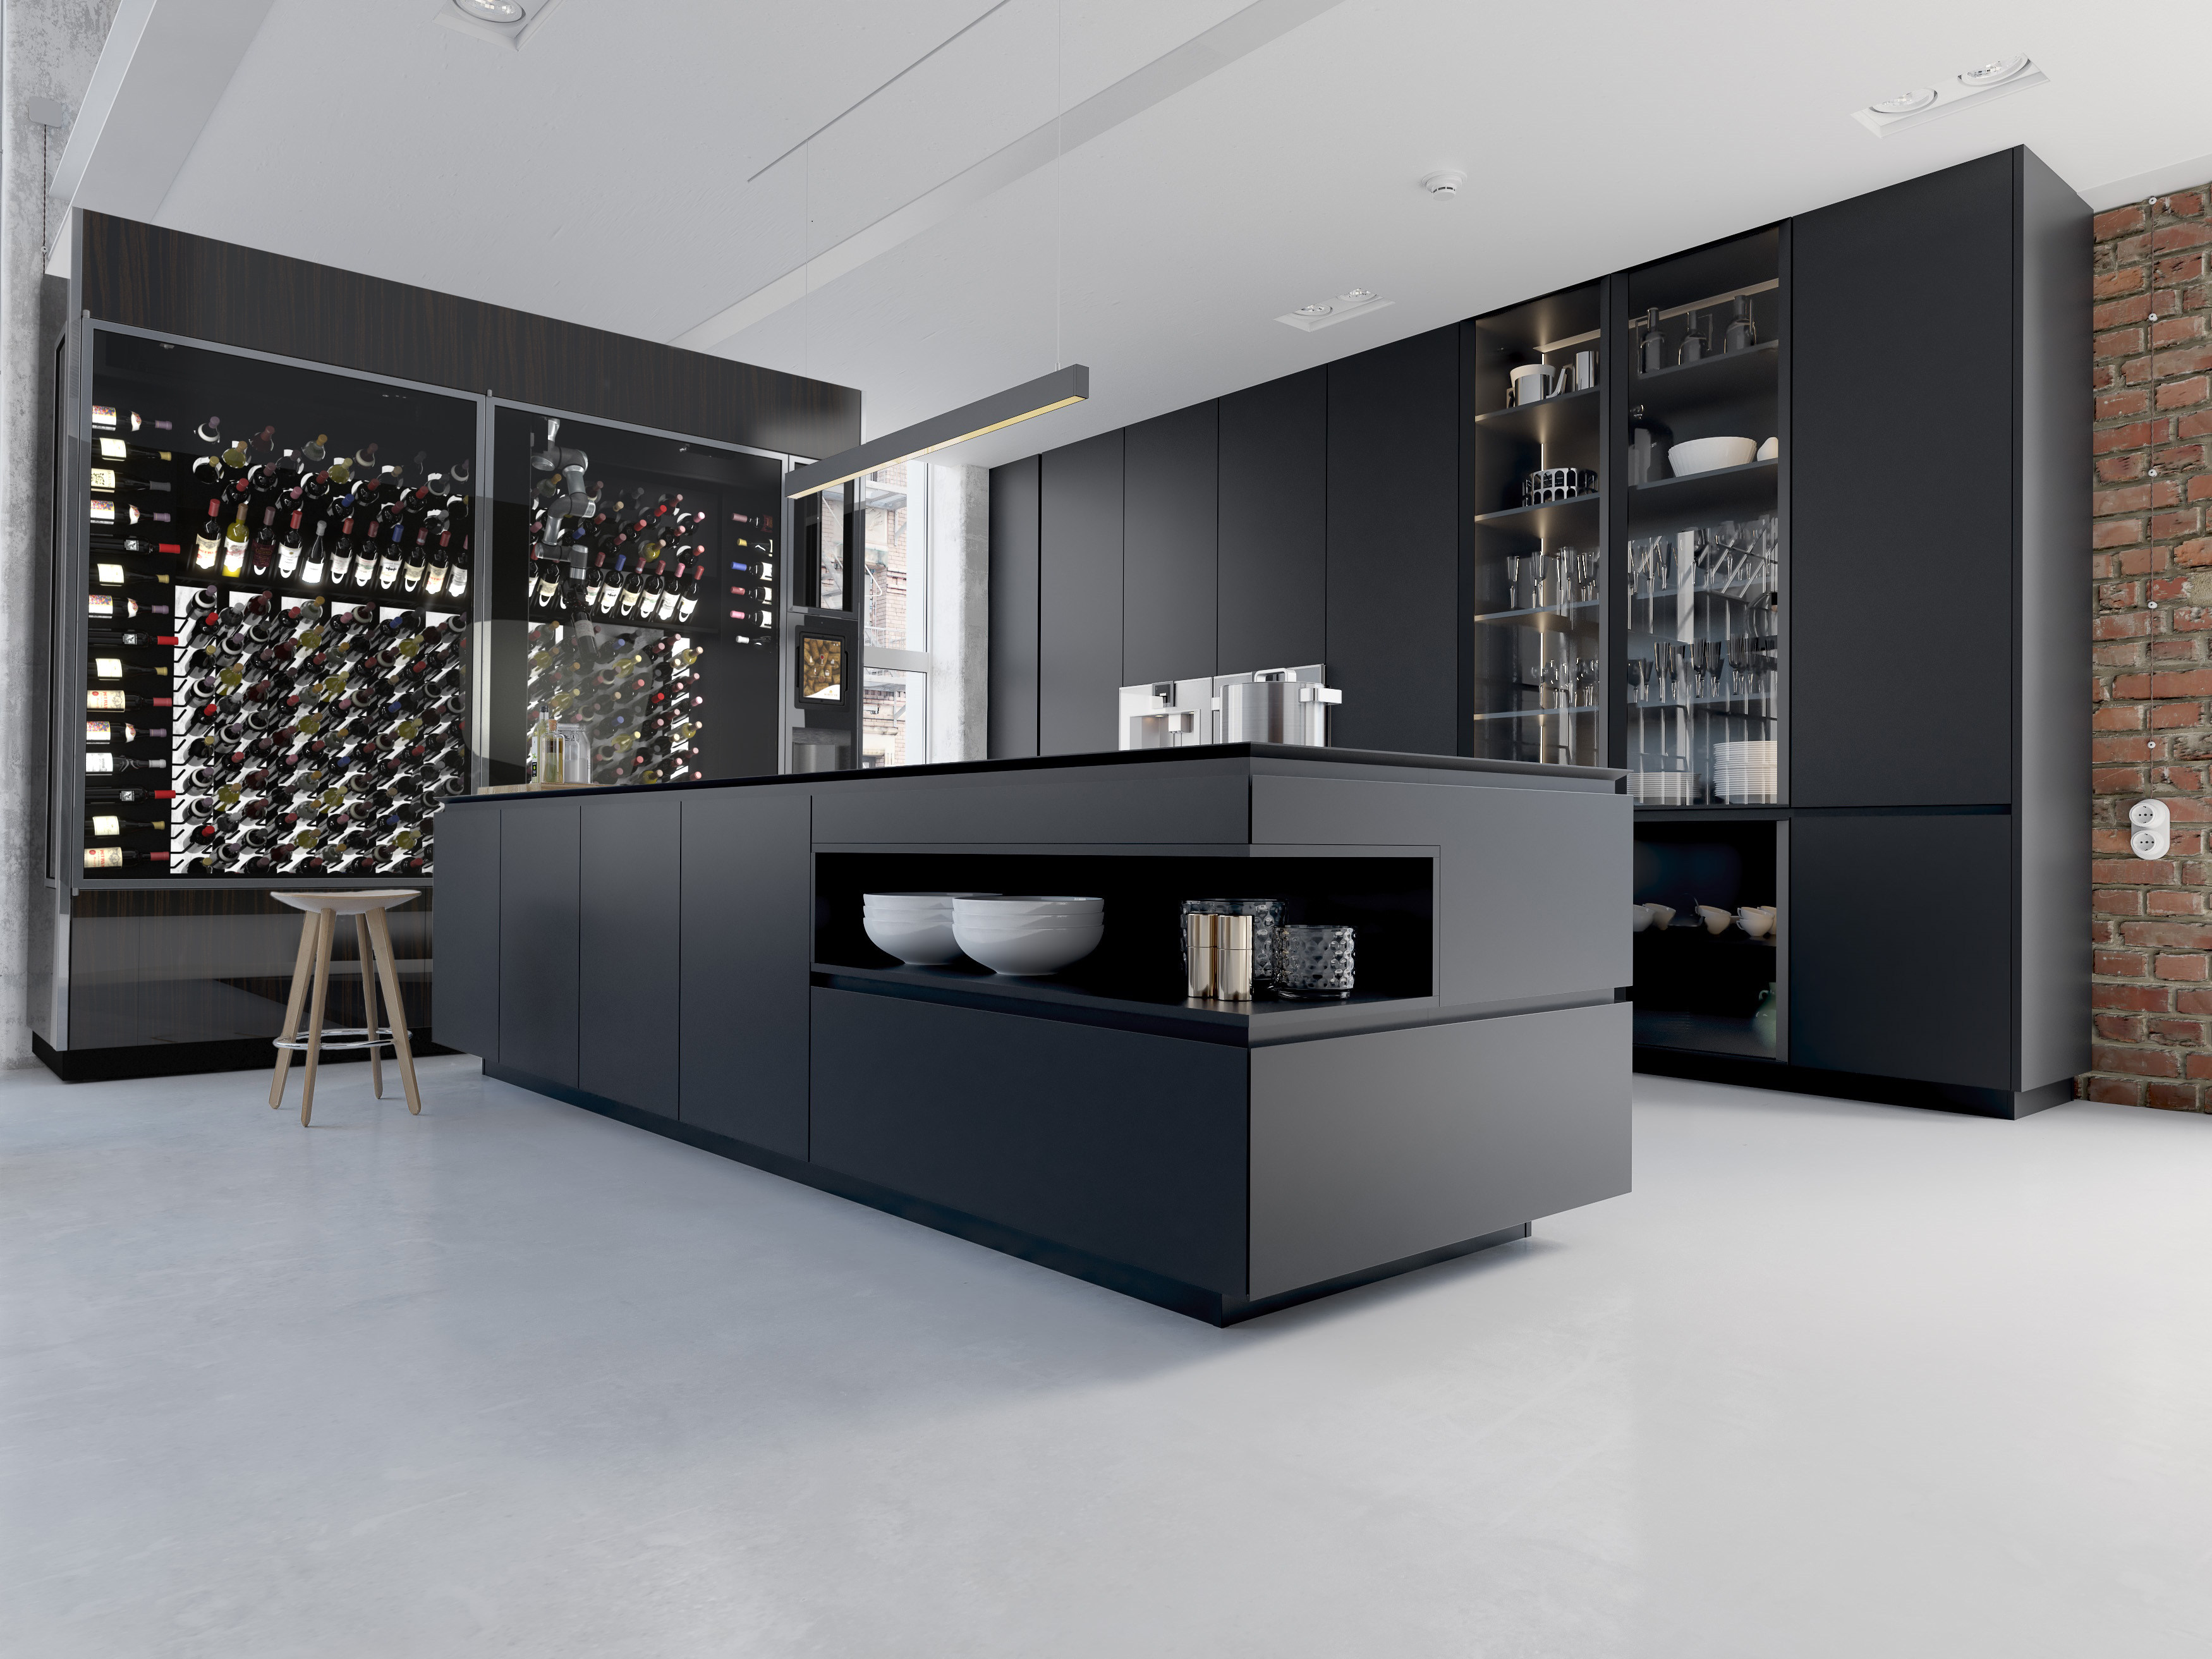 Winecab’s storage: would you pay US$180,000 for an AI-driven wine storage system that will offer recommendations and deliver your wine with a robotic arm? Photo: handout